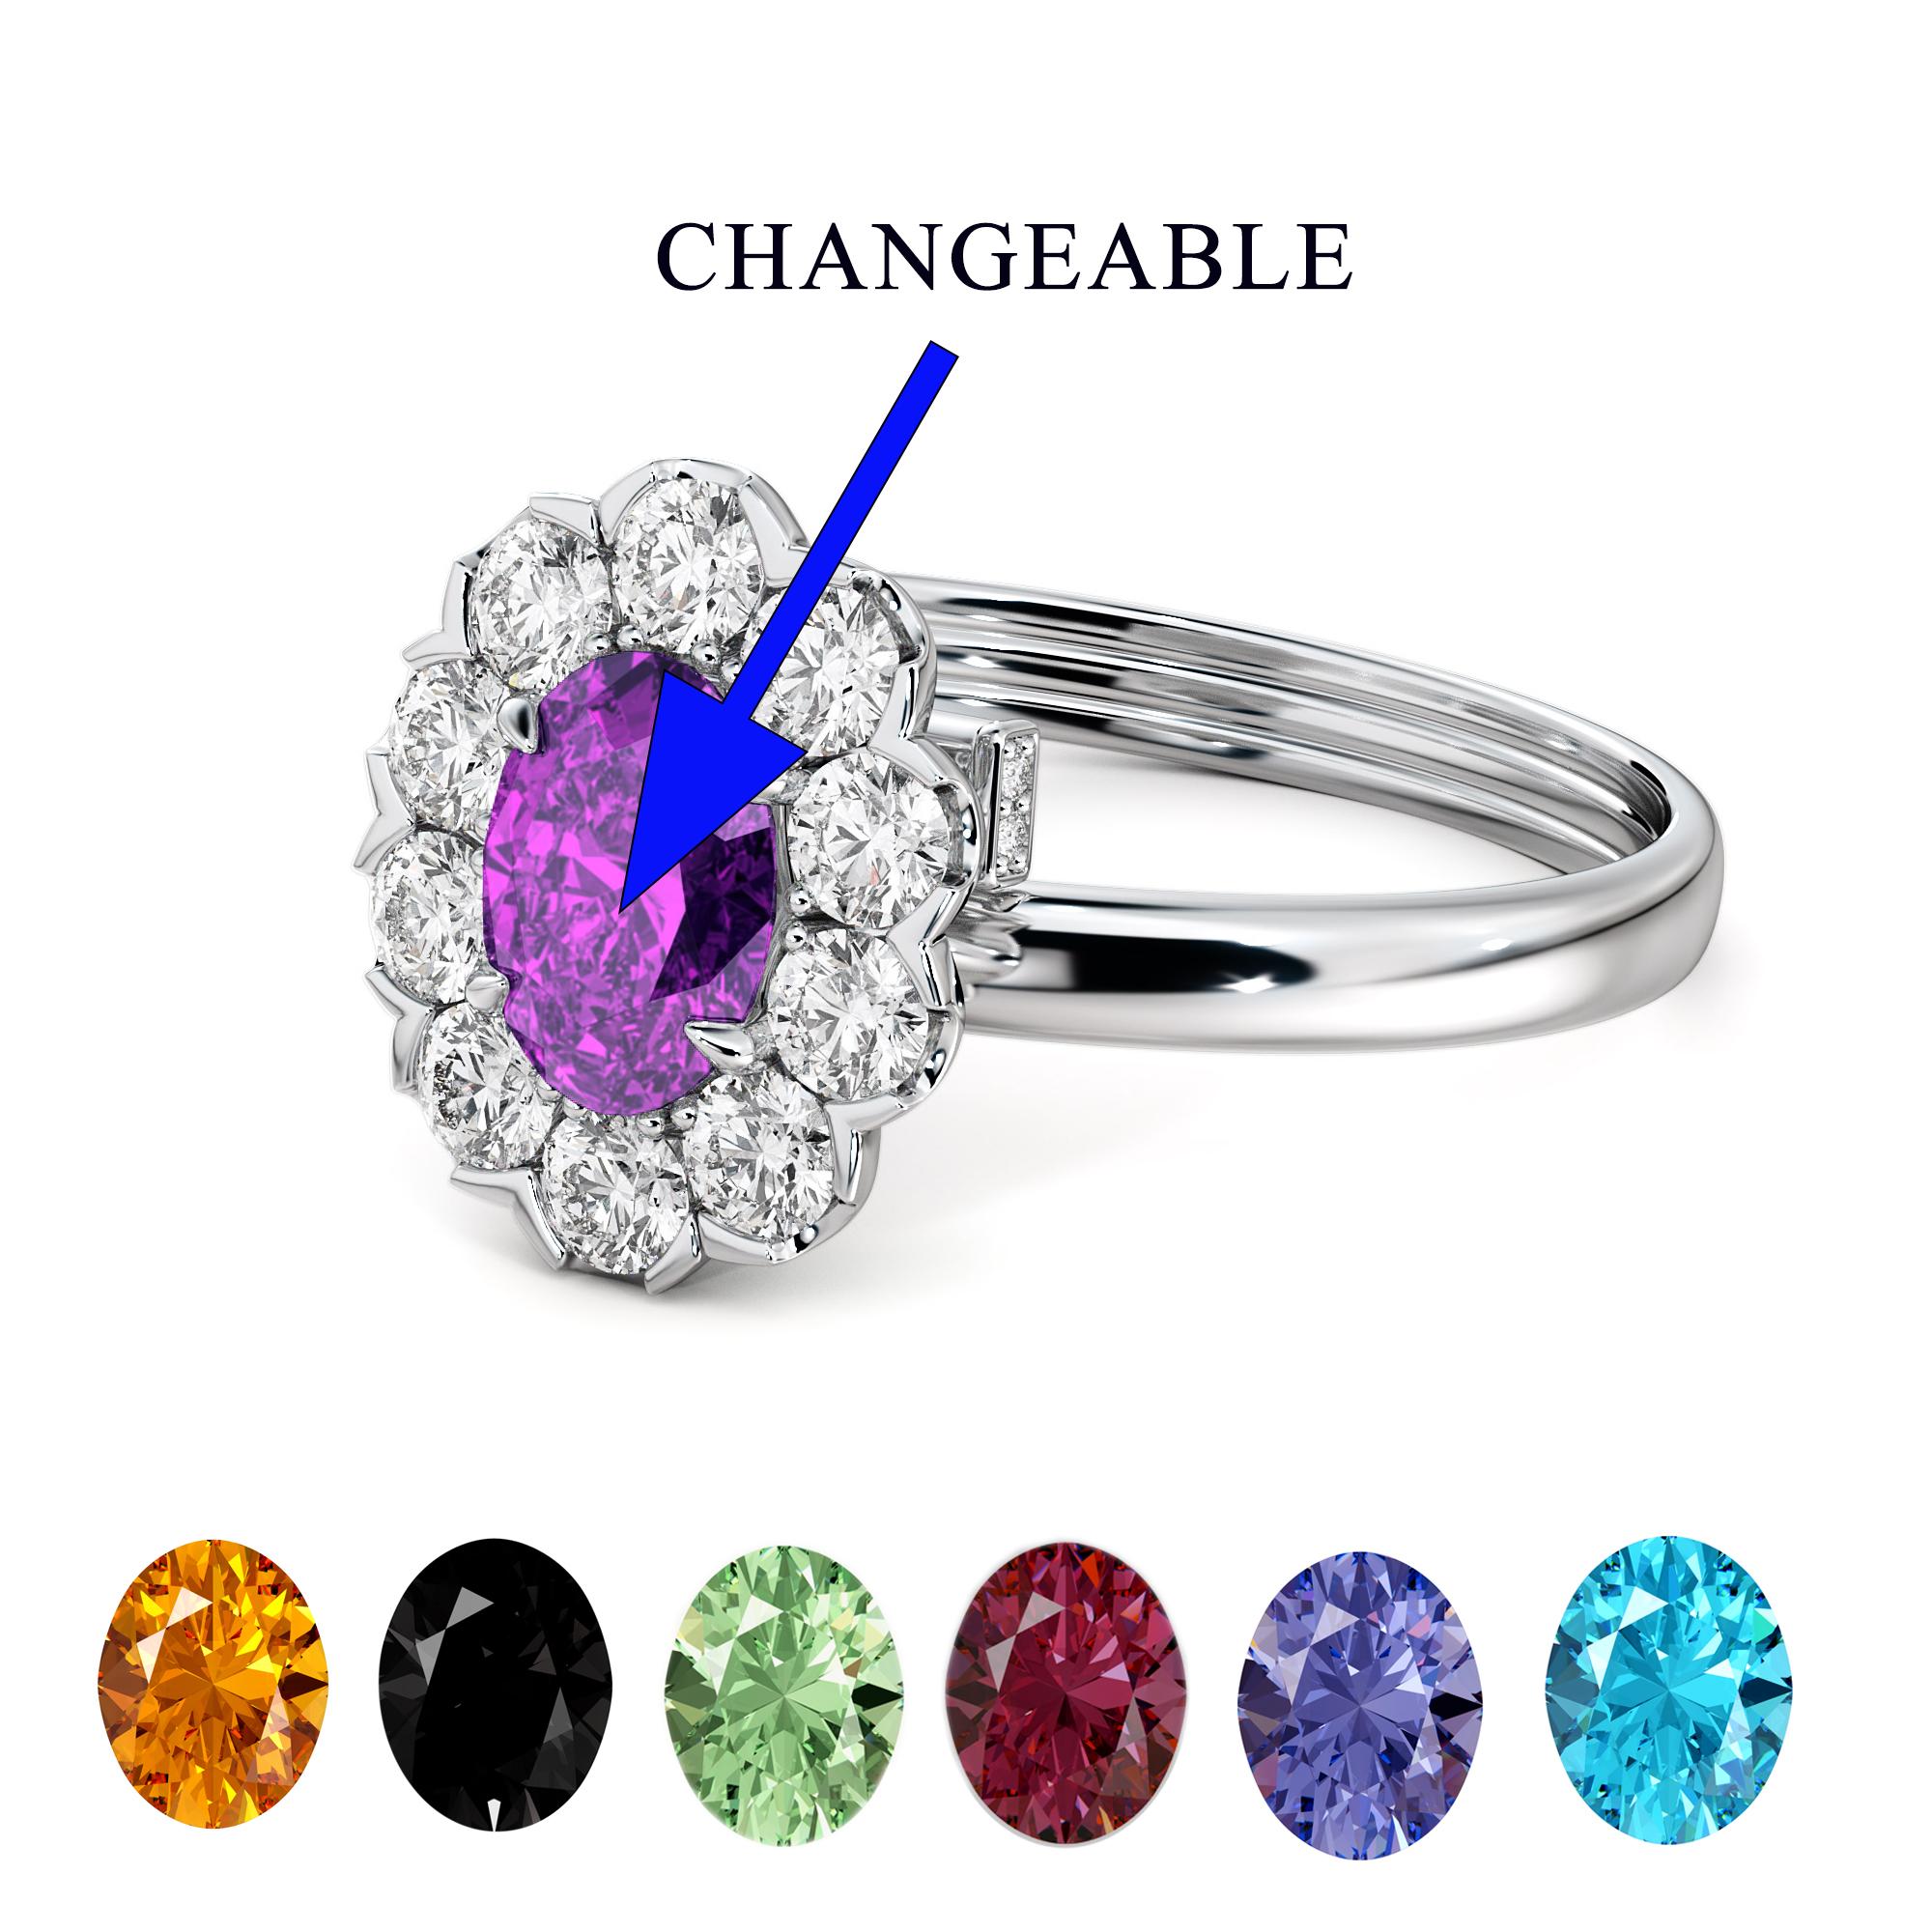 Unique High quality Cocktail ring - Changeable capability.
see video on how it works
14k white gold approx 3.10 grams
Natural Diamonds 0.60 carat G-VS
Natural Semi Precious - different color stones sizes 5 x 7 mm.
Each weight is approx between 0.60